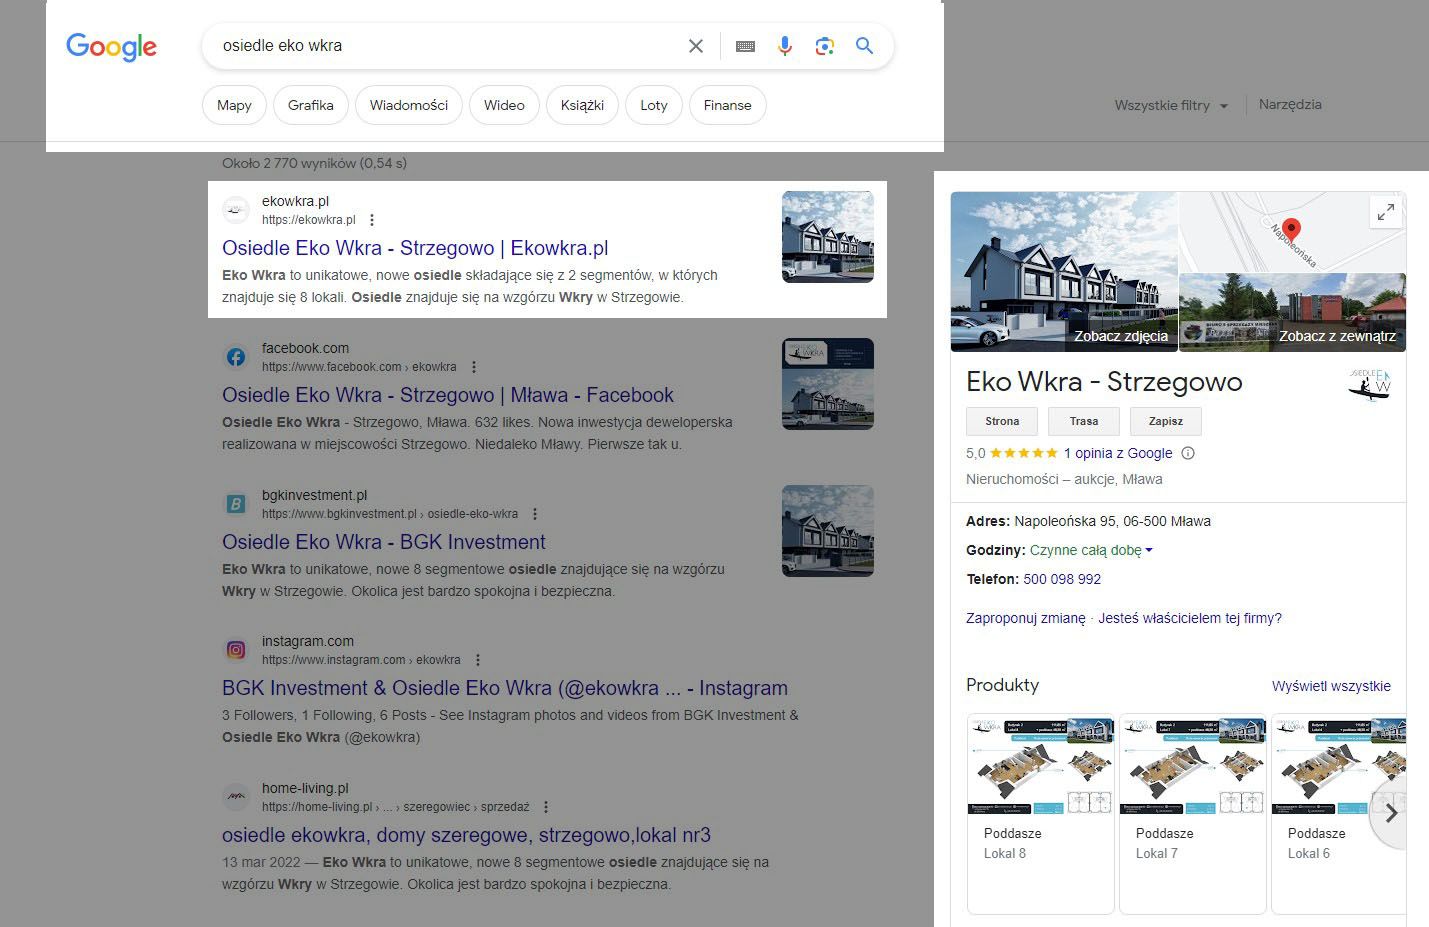 google-my-business-real-estate-investment-example-google-search.jpg